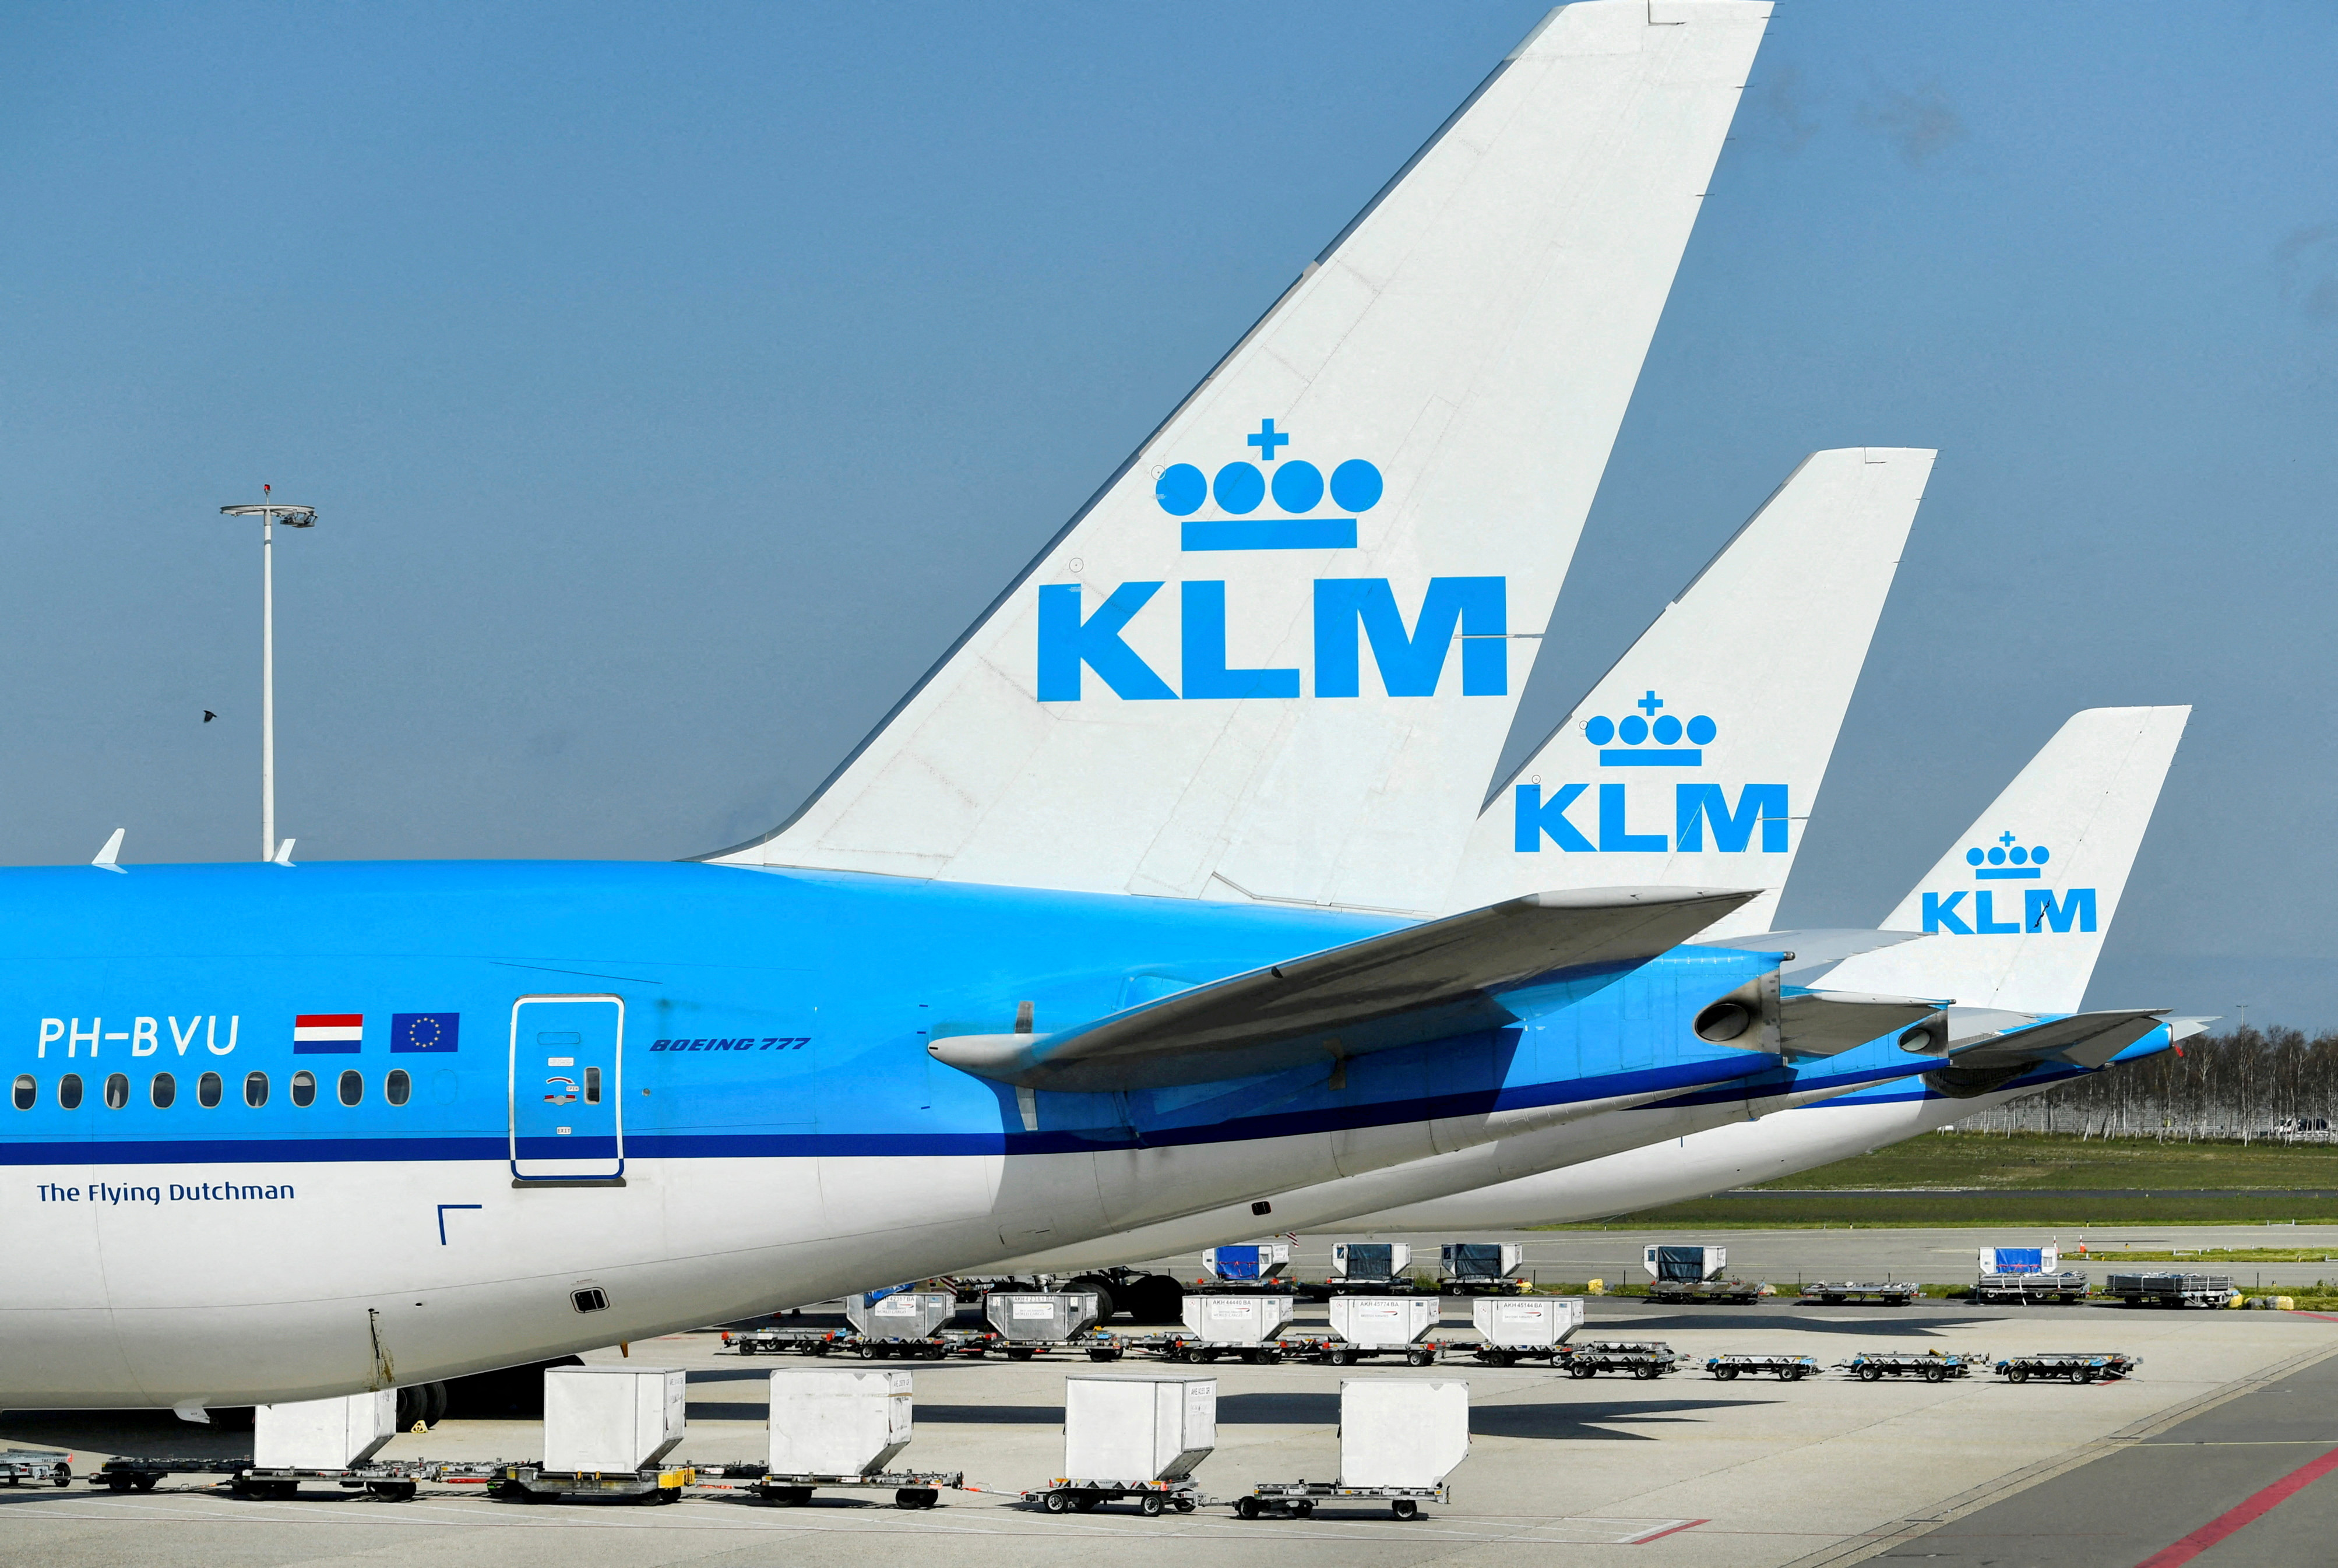 KLM airplanes are seen parked at Schiphol Airport